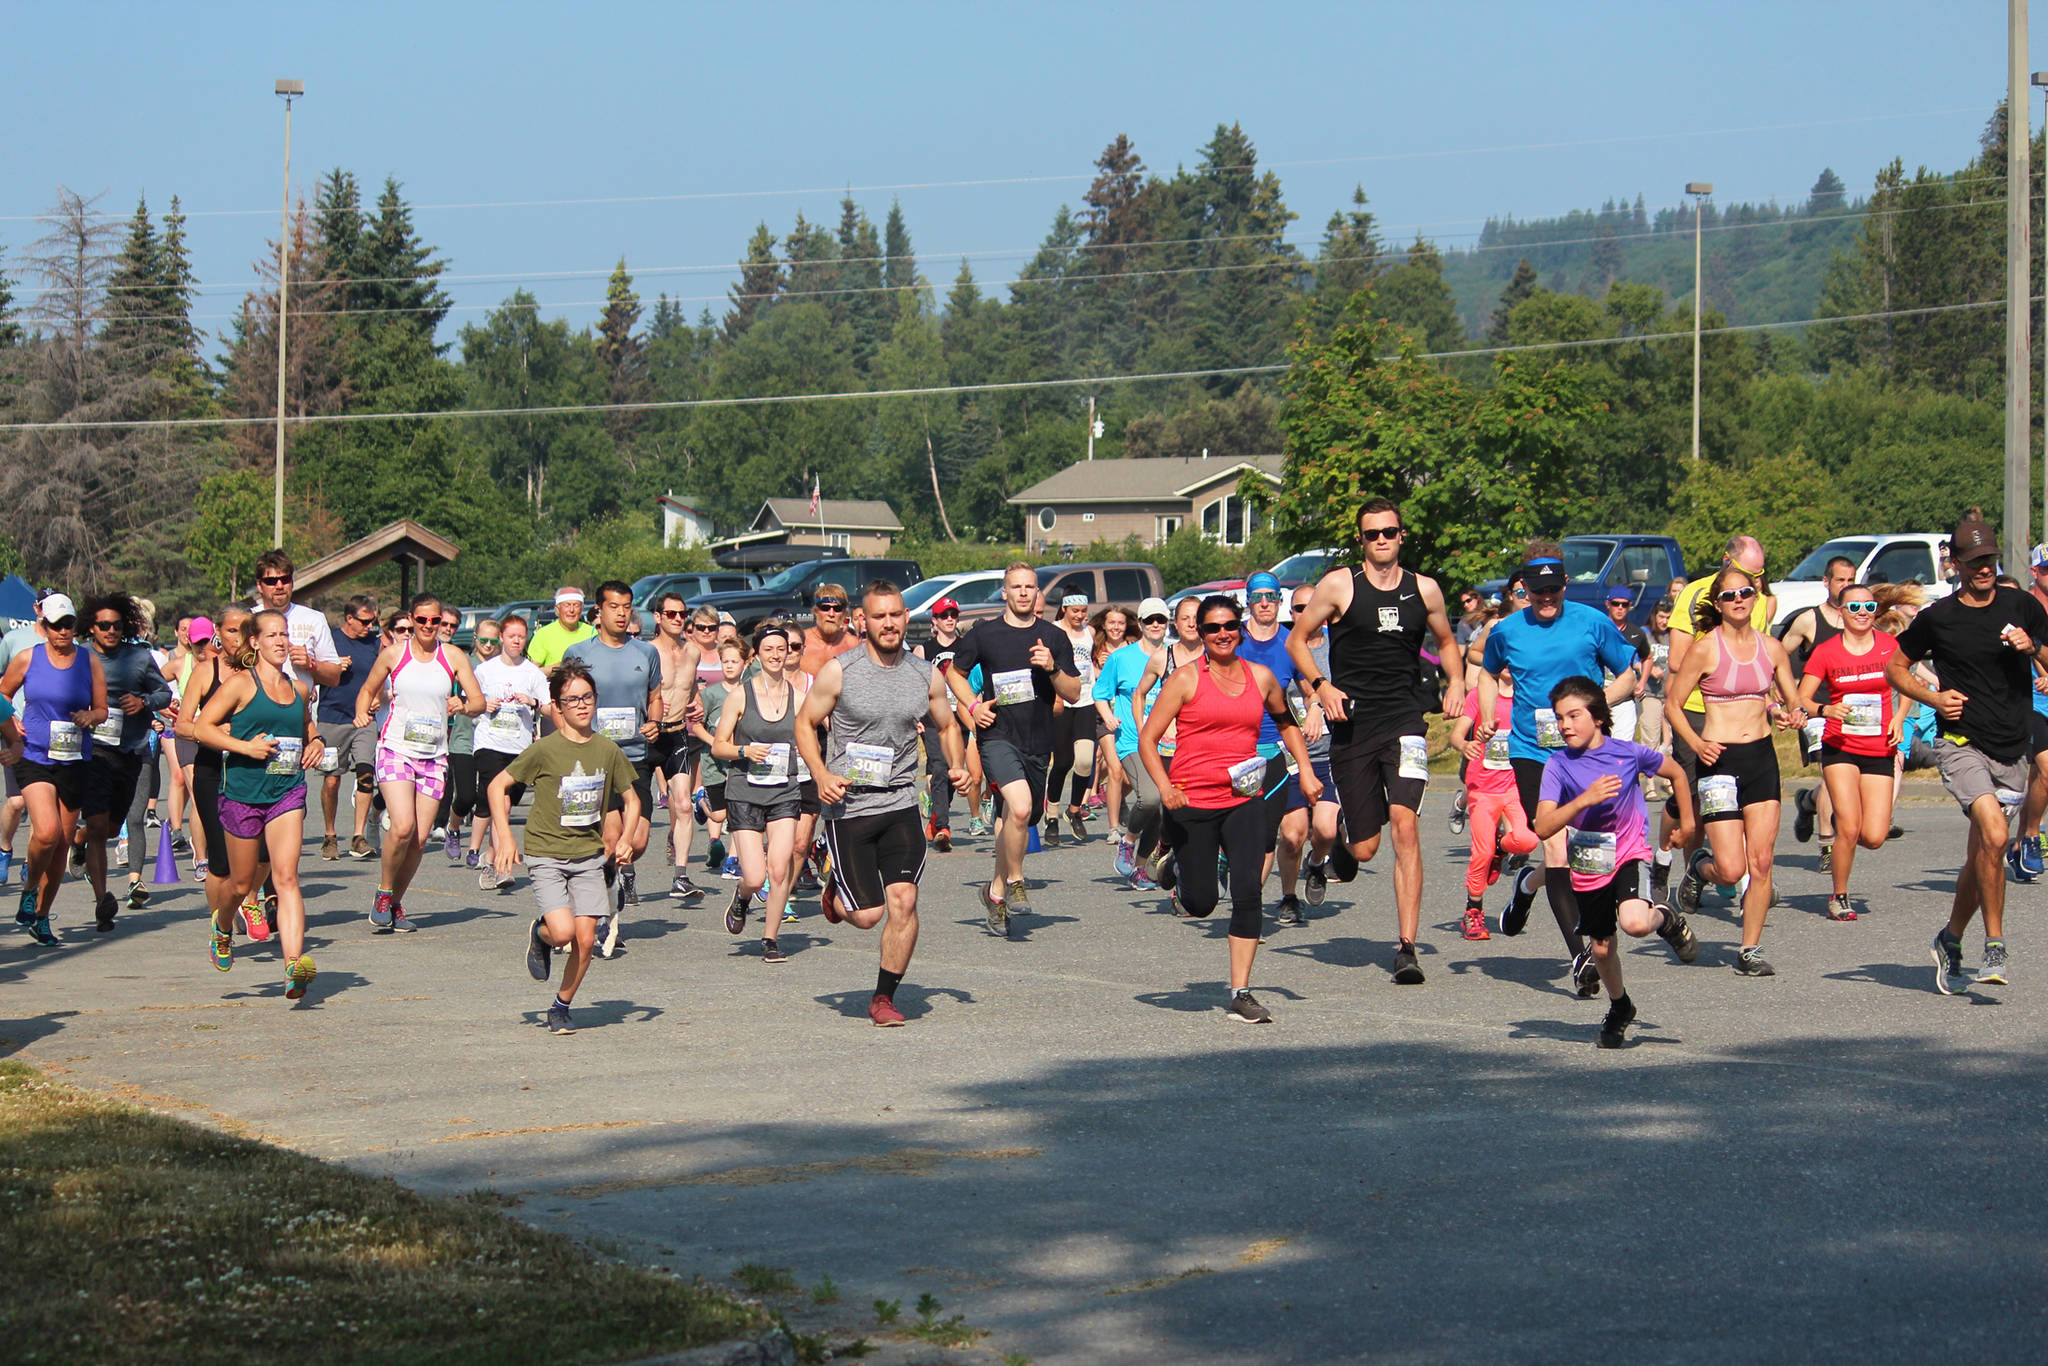 Participants in this year’s Spit Run 10k to the Bay take off from the starting line at Homer High School on Saturday, June 29, 2019 in Homer, Alaska. (Photo by Megan Pacer/Homer News)